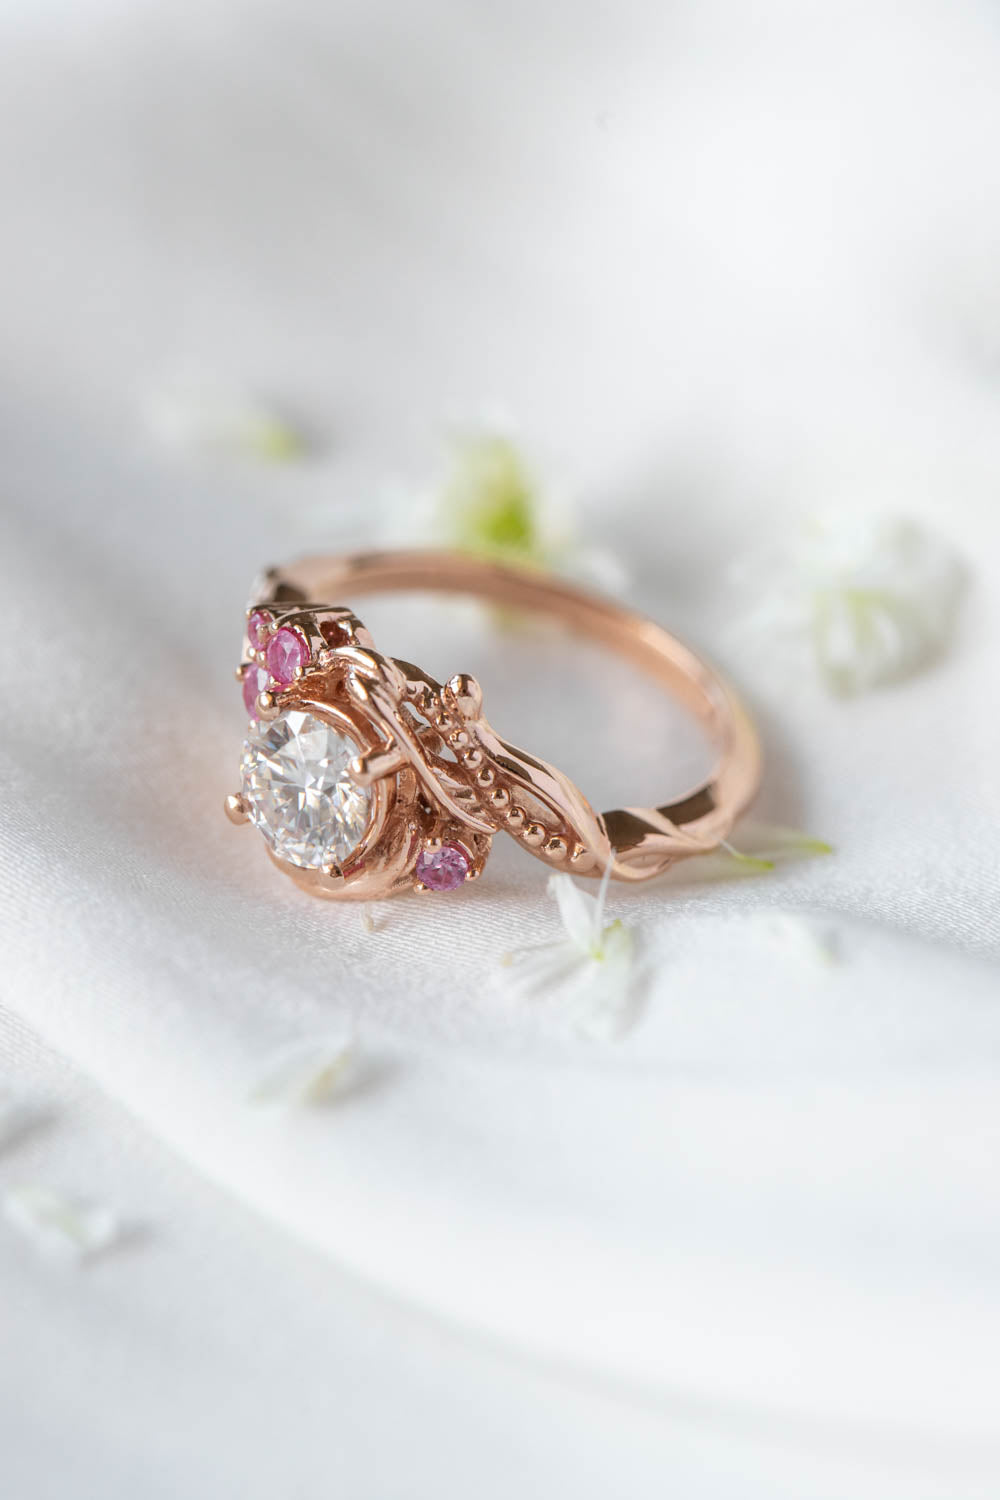 1 carat moissanite engagement ring with pink sapphires, nature themed gold proposal ring / Undina - Eden Garden Jewelry™